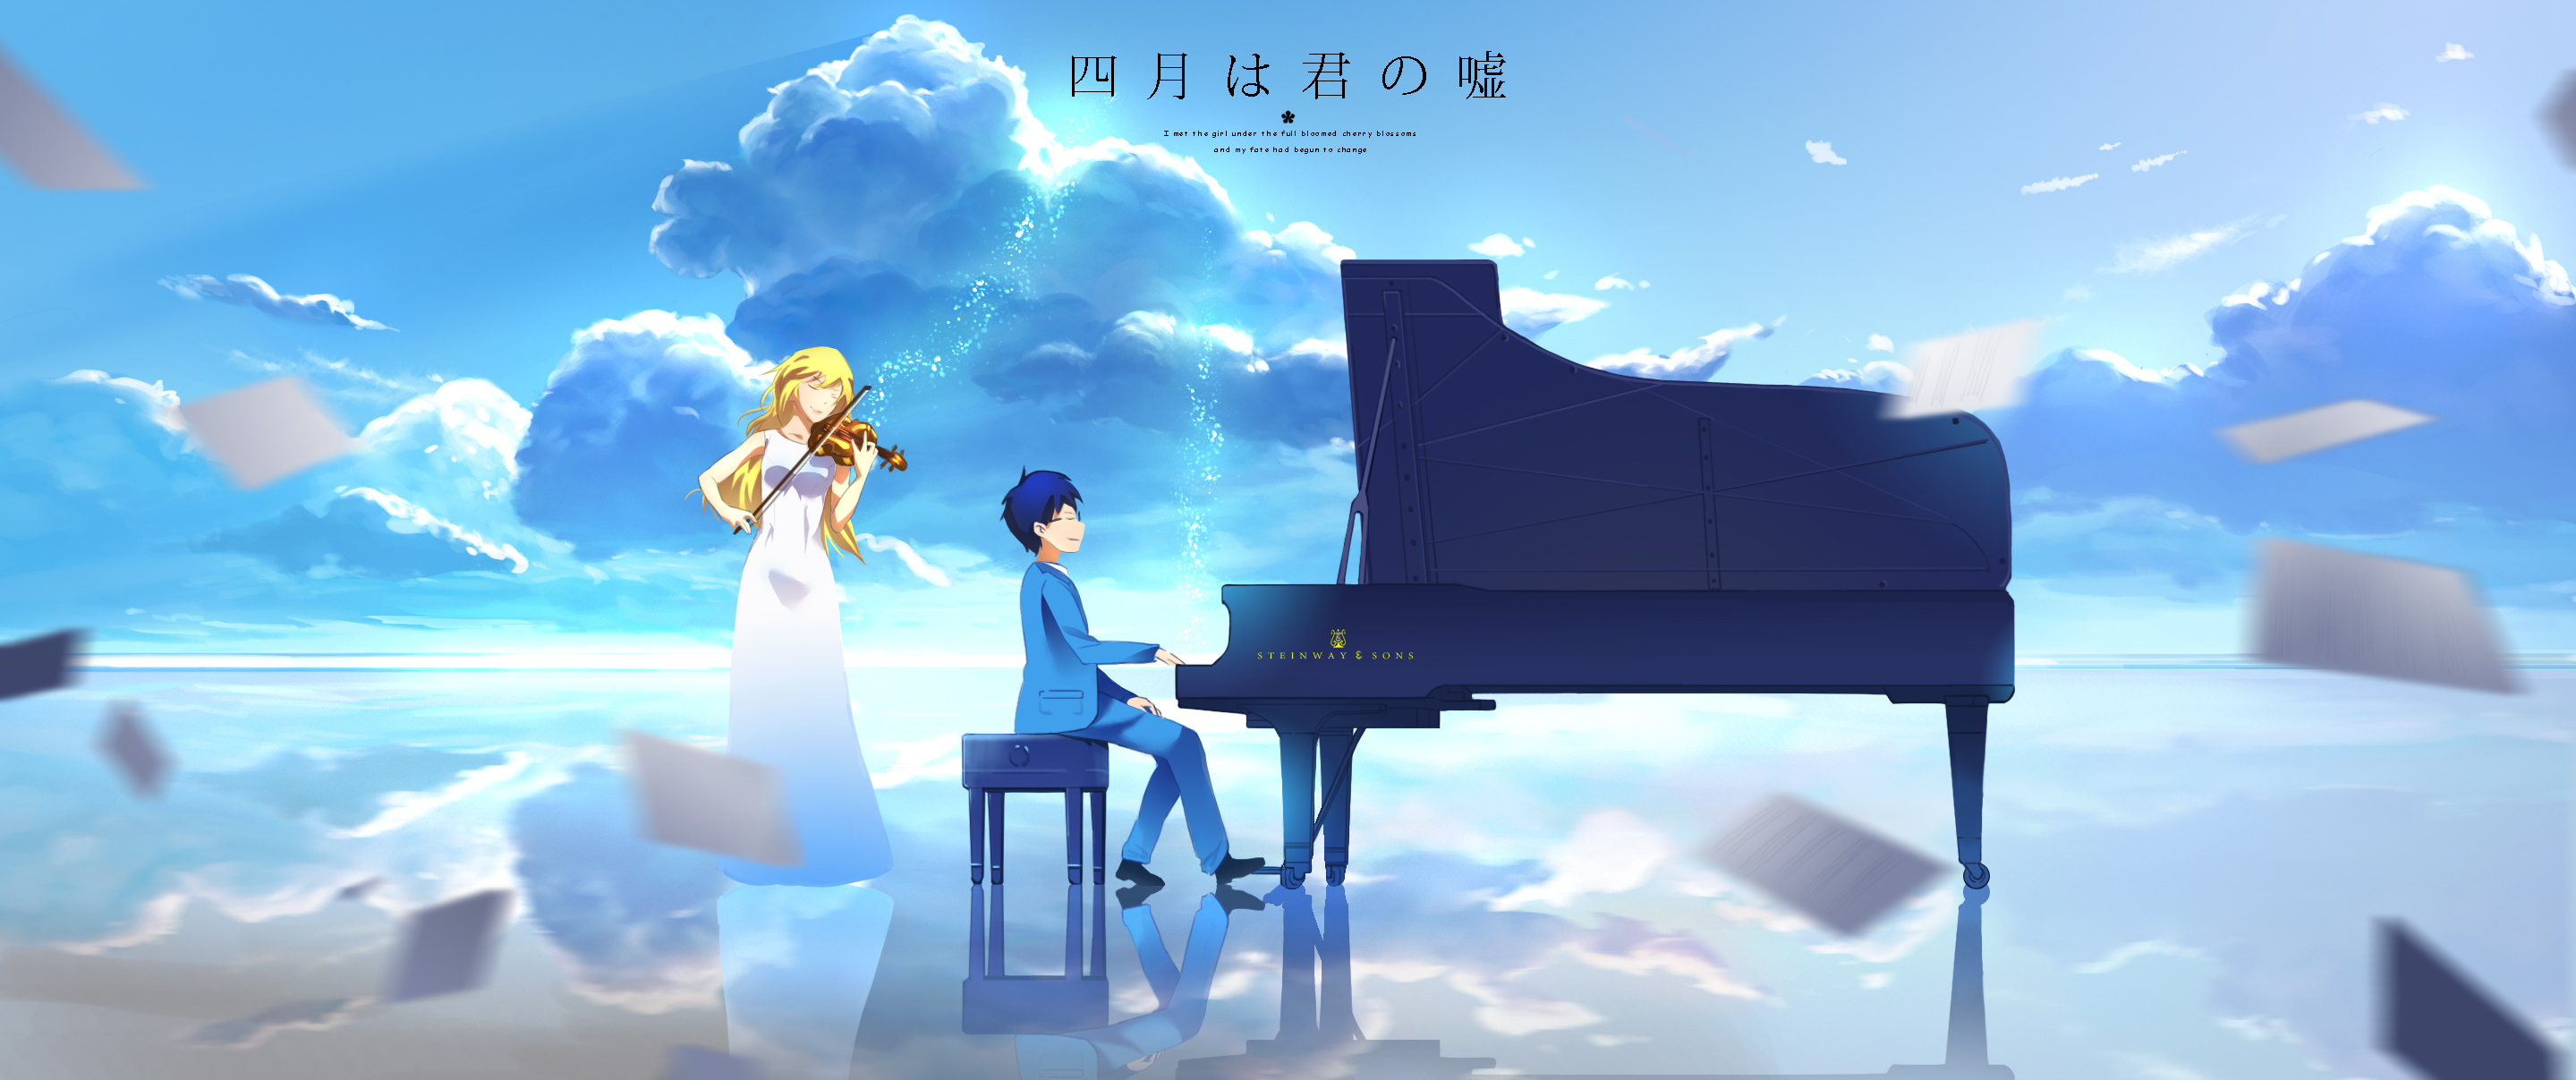 145 Your Lie in April HD Wallpapers  Background Images 